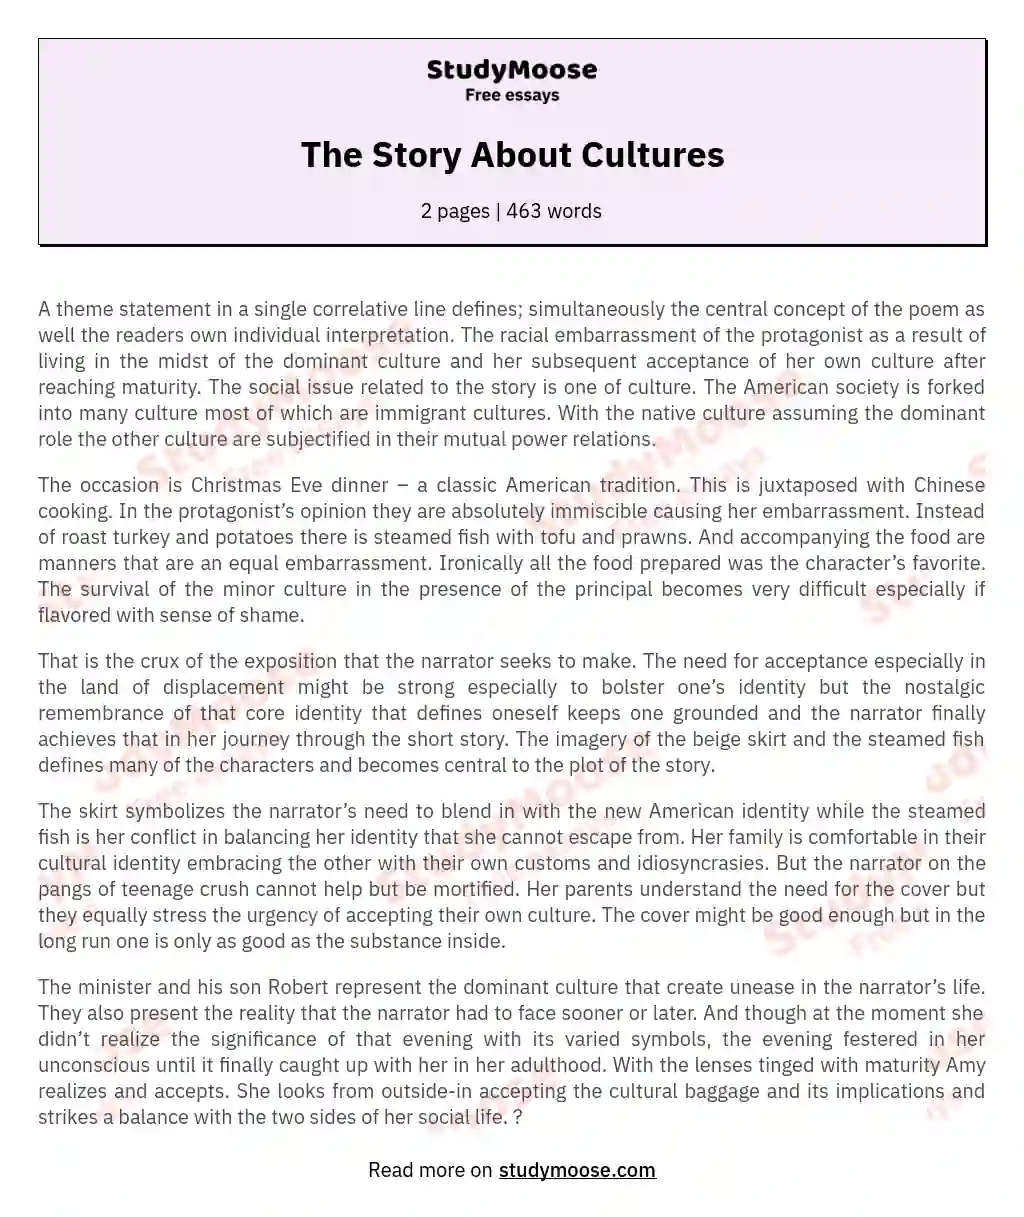 The Story About Cultures essay